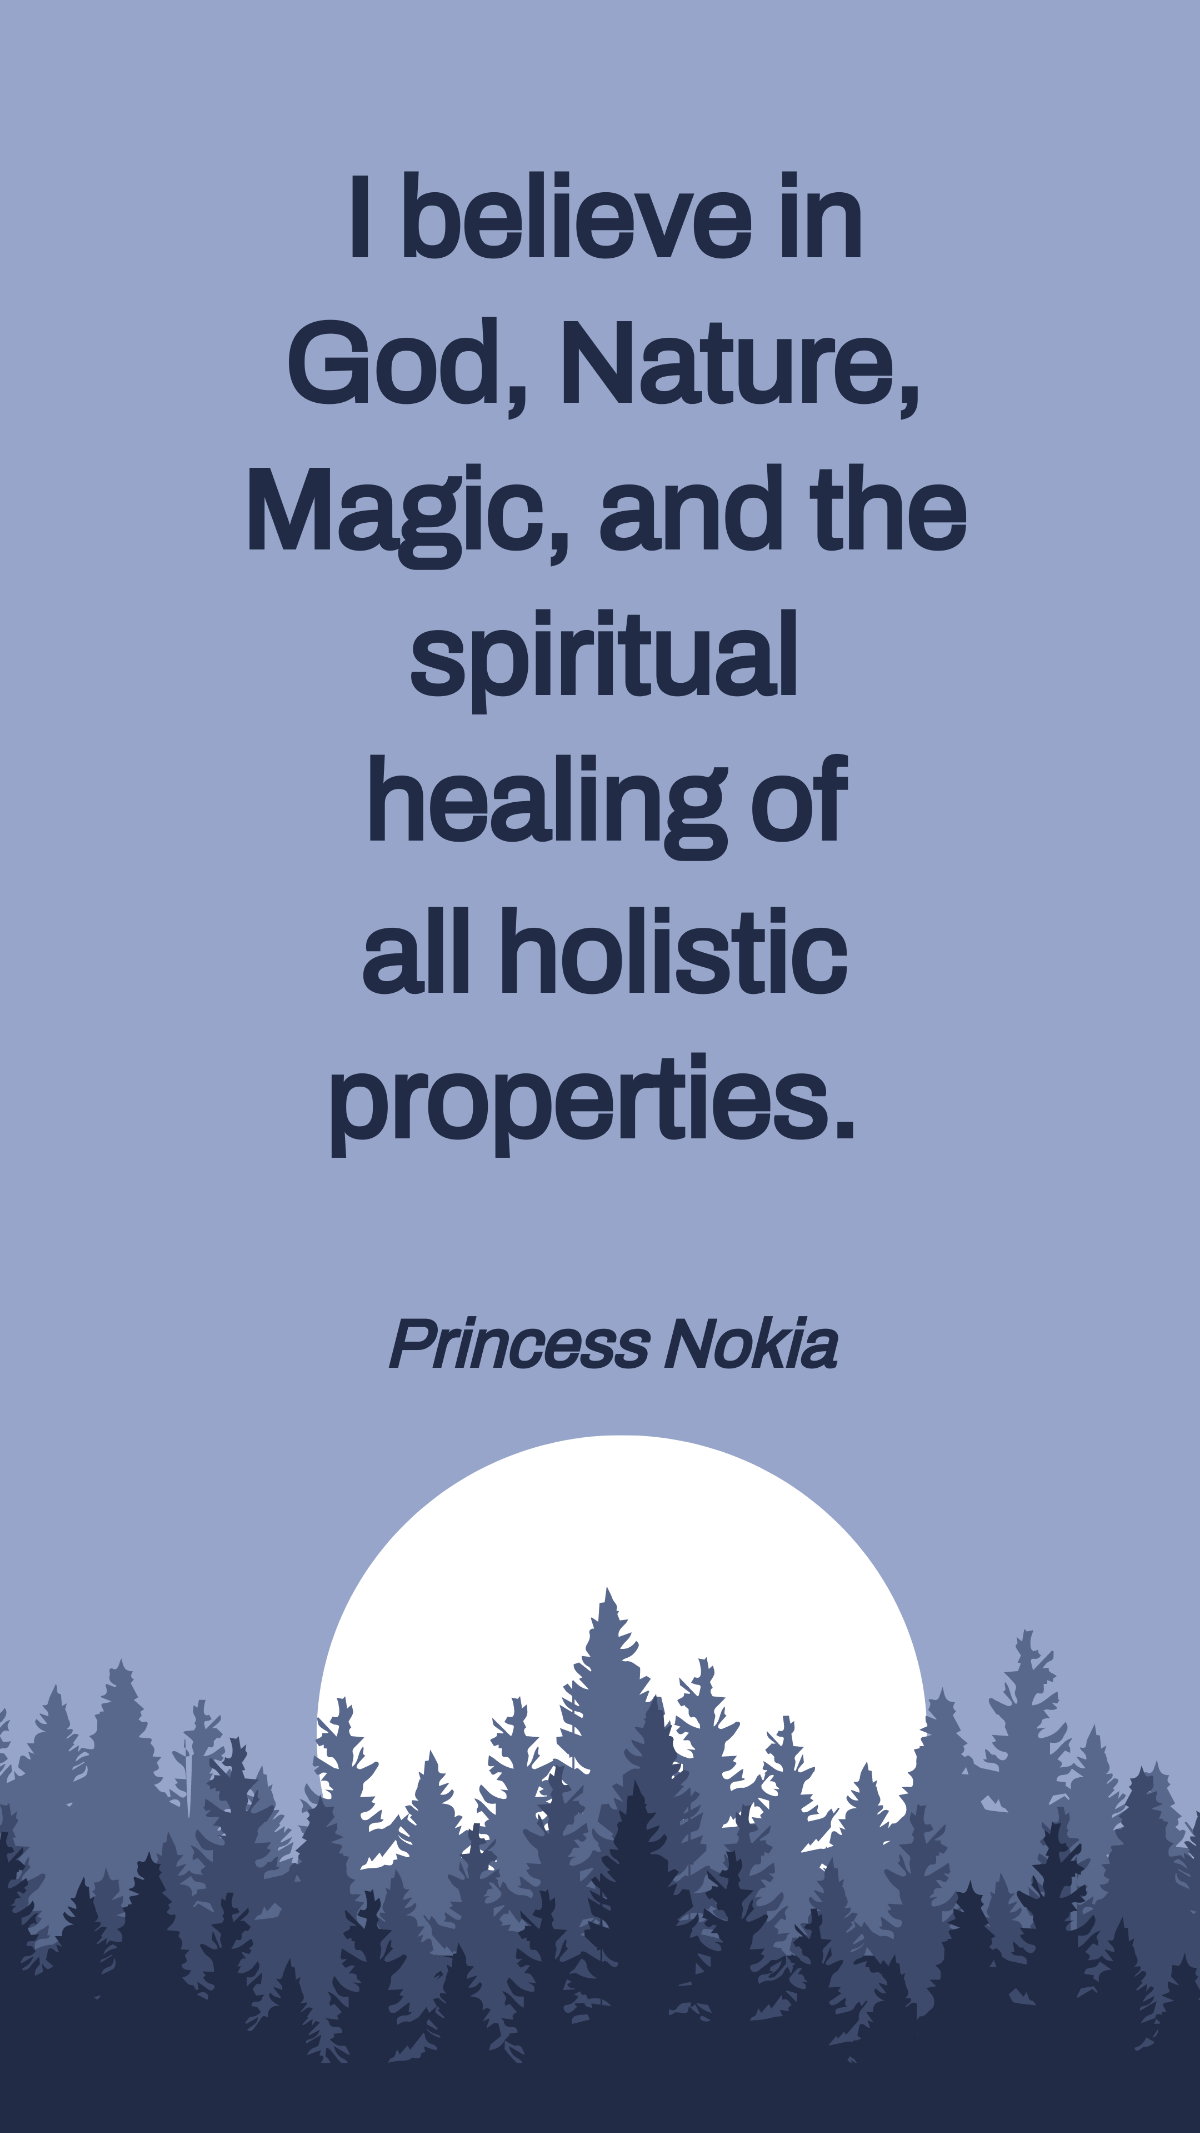 Princess Nokia - I believe in God, Nature, Magic, and the spiritual healing of all holistic properties. Template